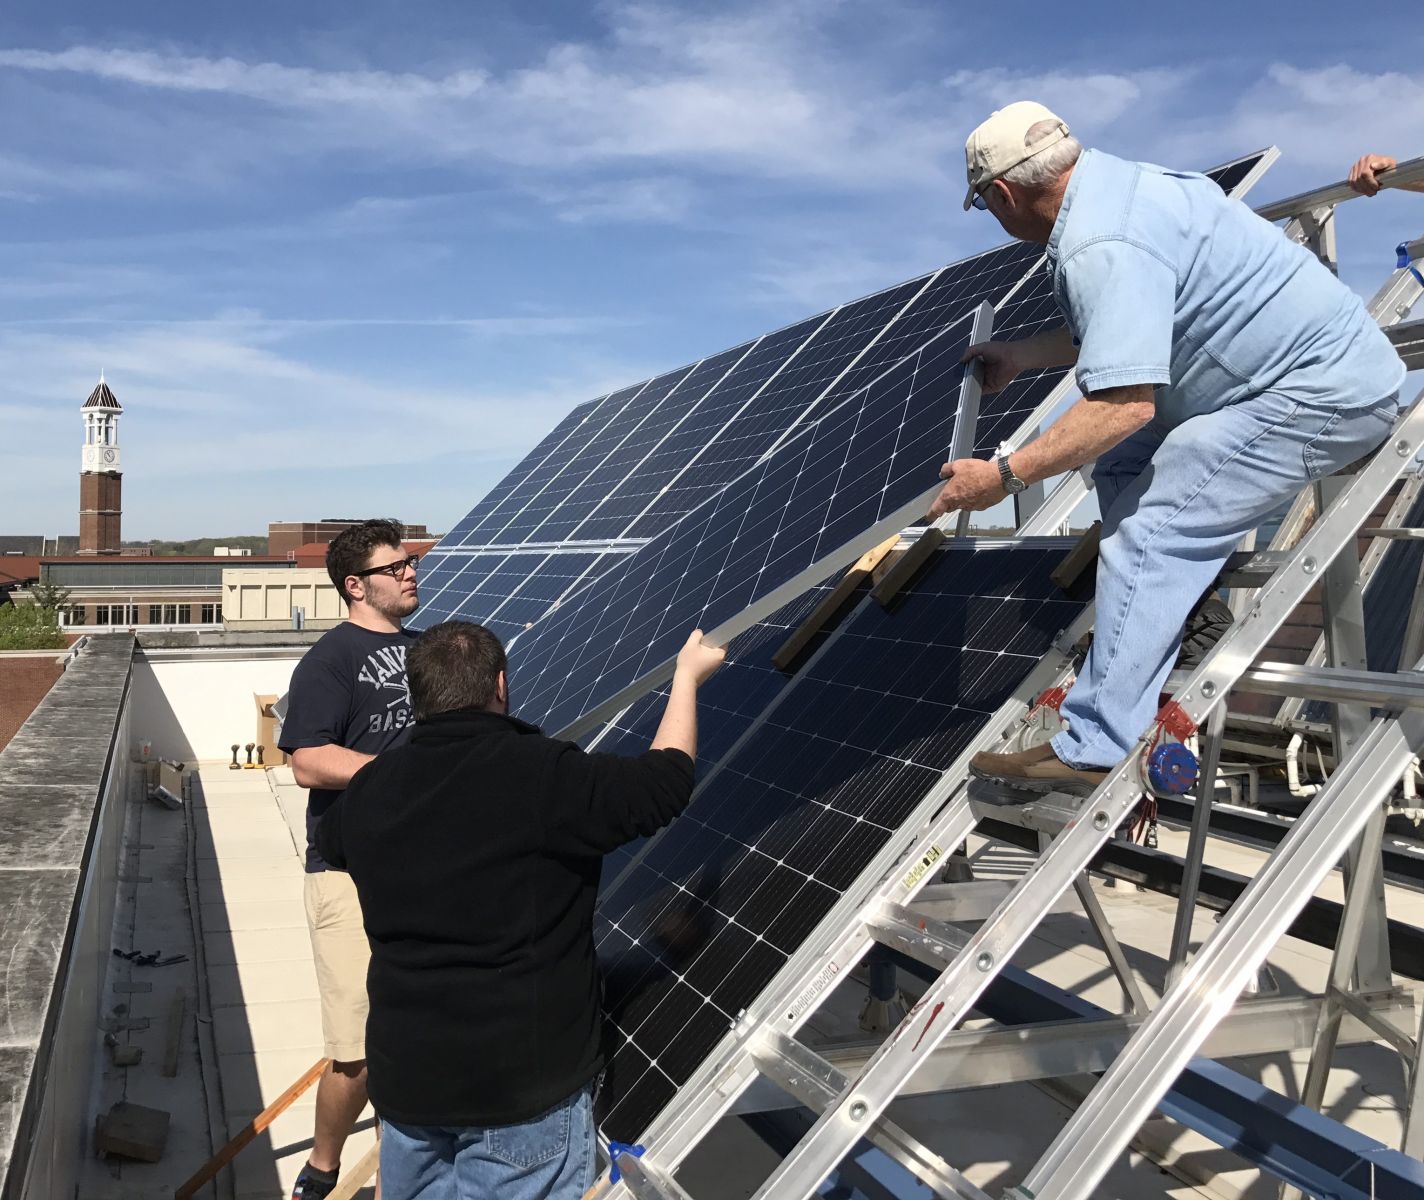 Students hand off a new solar panel on Knoy's rooftop